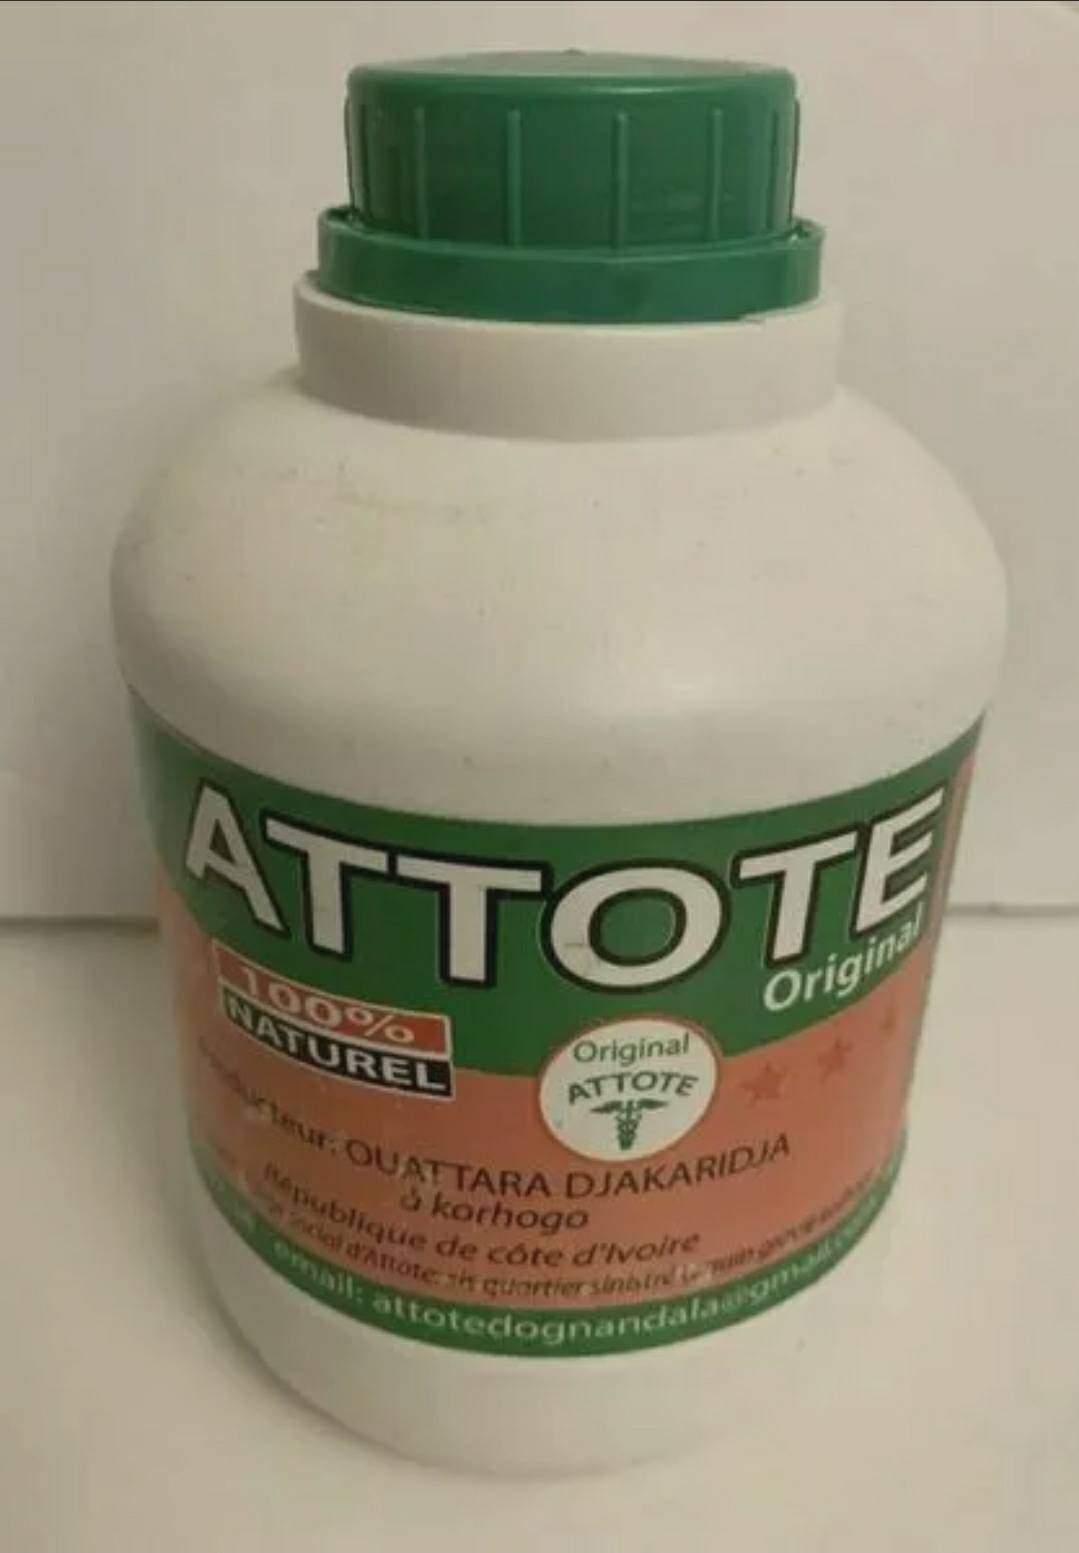 Attote Original Ivory Coast Herbal Mix for Pile and Man Power – ZYFOK FOODS